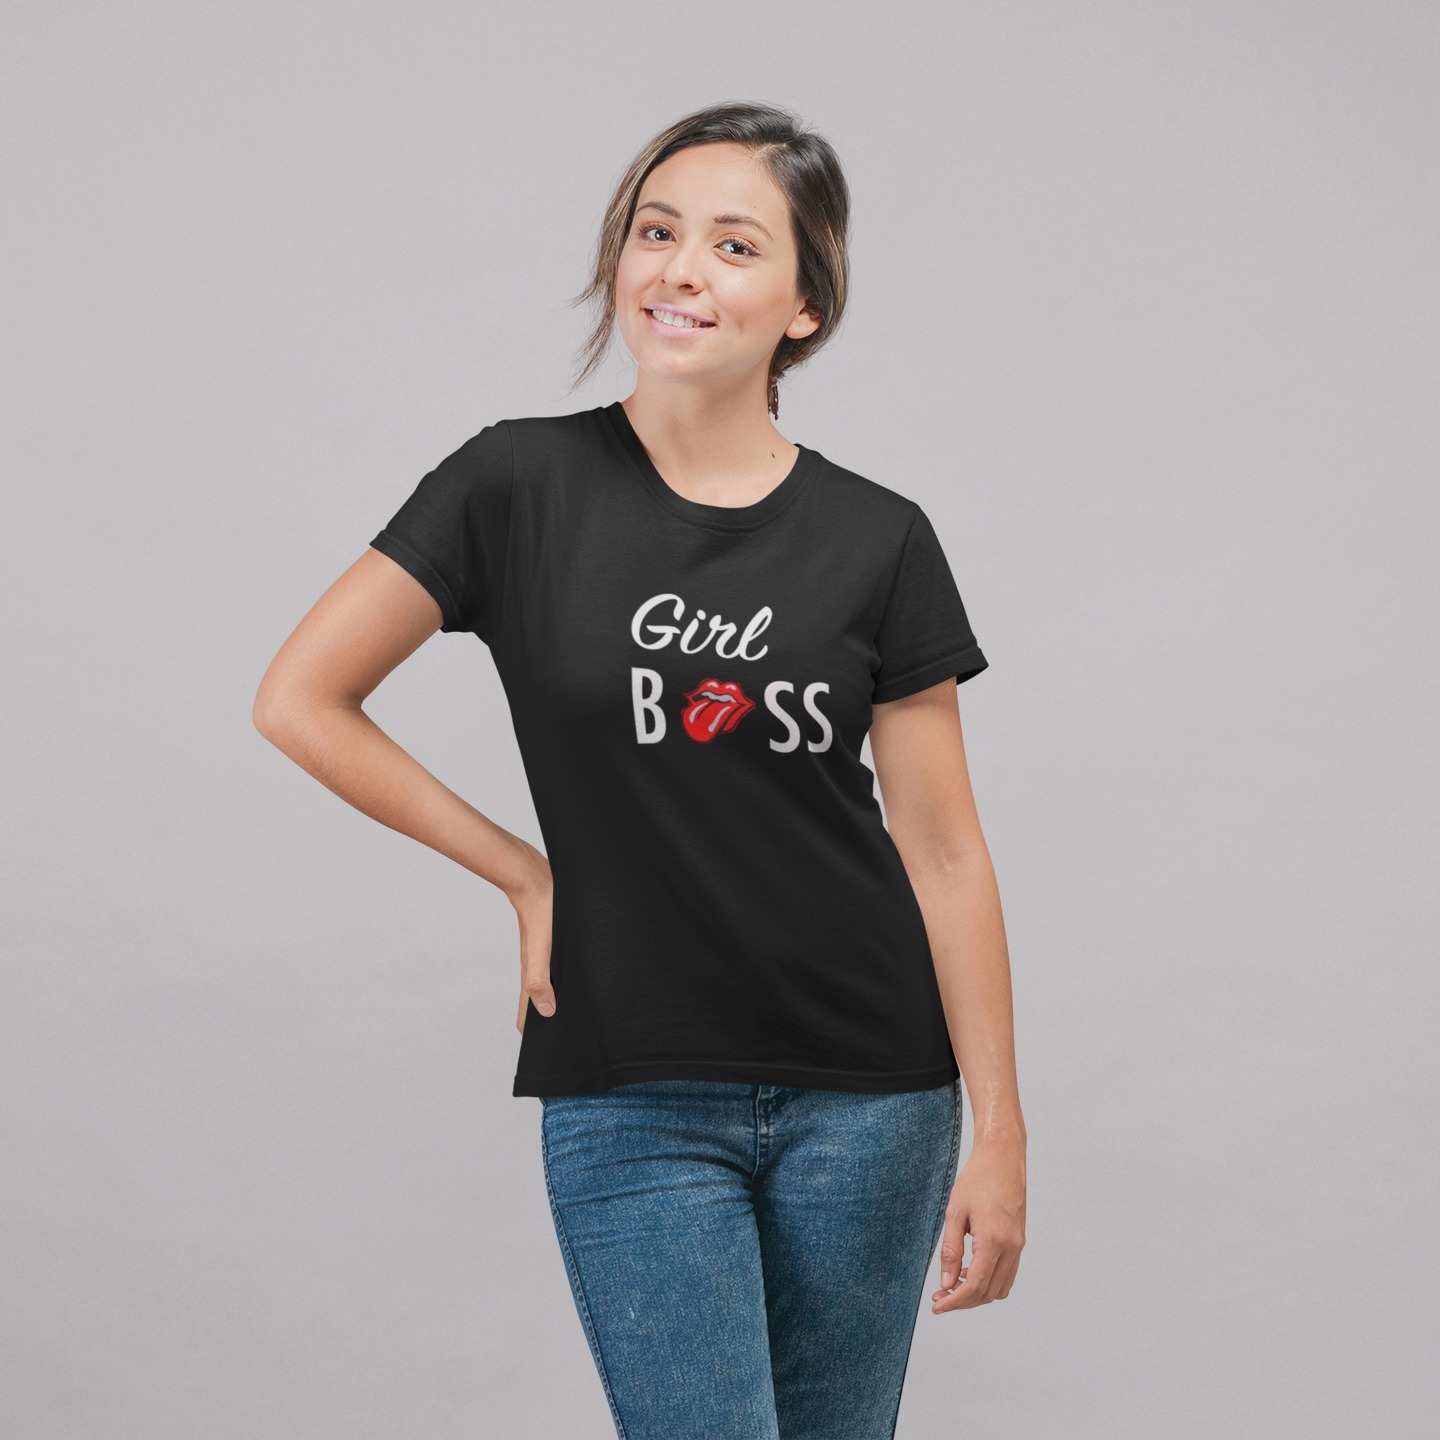 Girl Boss Patch and Printed T-Shirt for Women